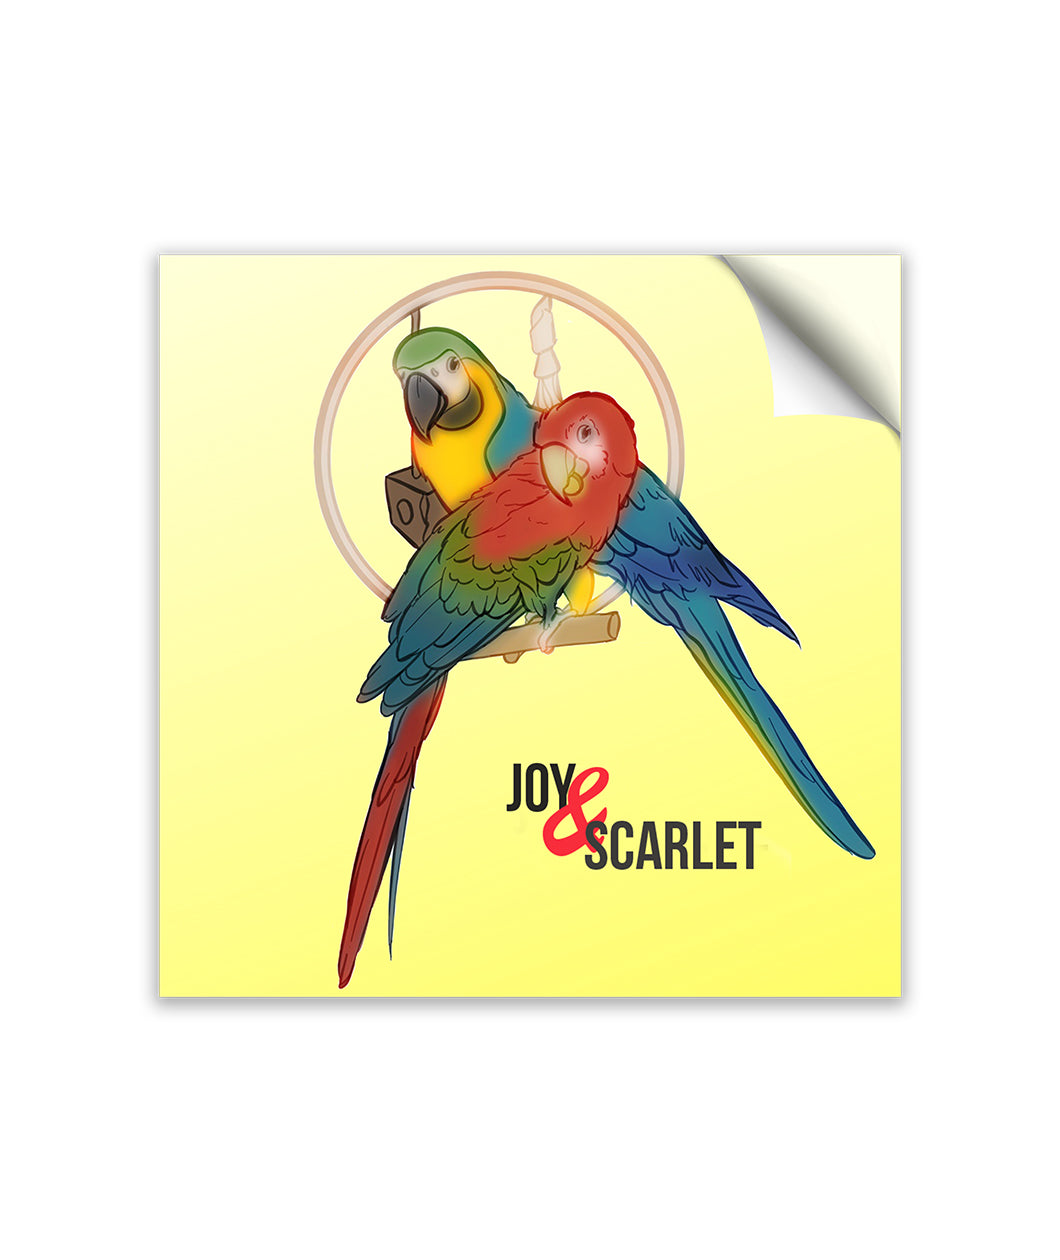 Two mackaws sitting on a tan dowell. Mackaw in front is red, green, and blue. Behind is another mackaw colored yellow, green, and blue. Both are in front of small tan circle. Inside of circle are objects hanging. “Joy & Scarlet” is written below mackaws in black sans serif font. The “&” is italicized and red. The base color of sticker is yellow - from Animal Wonders